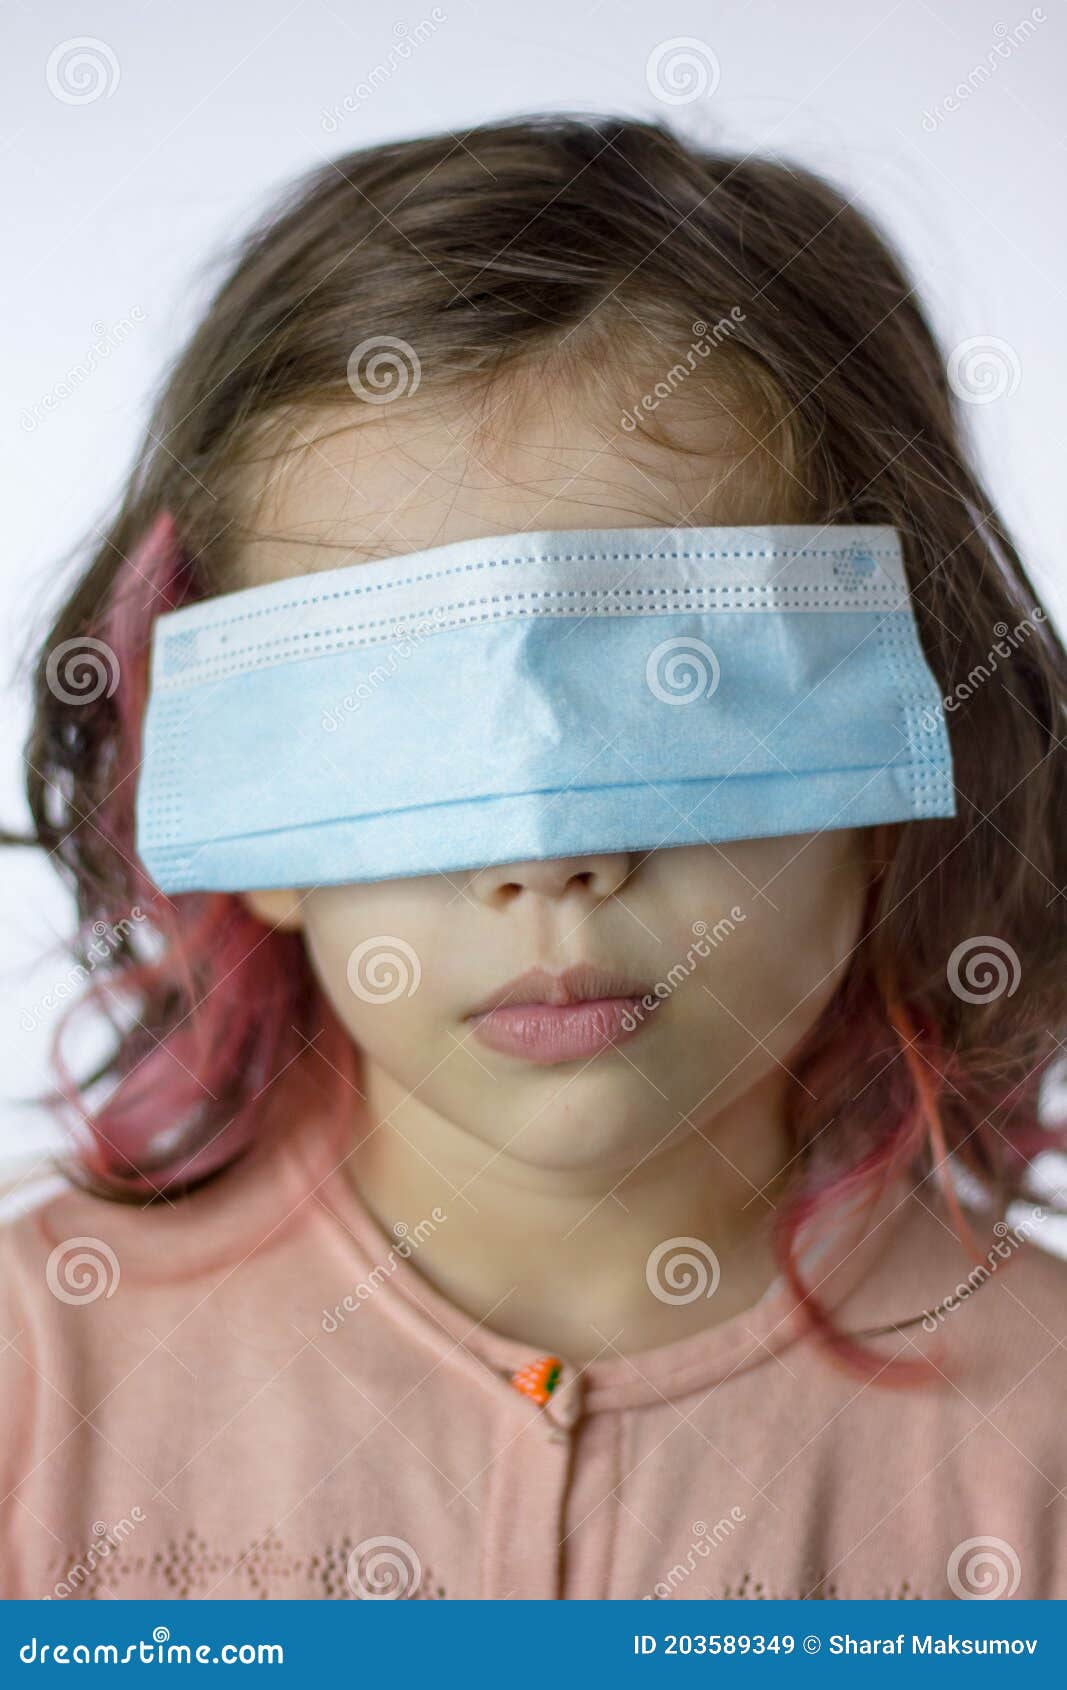 little kid girl with the eyes closed by mask during coronavirus epidemy